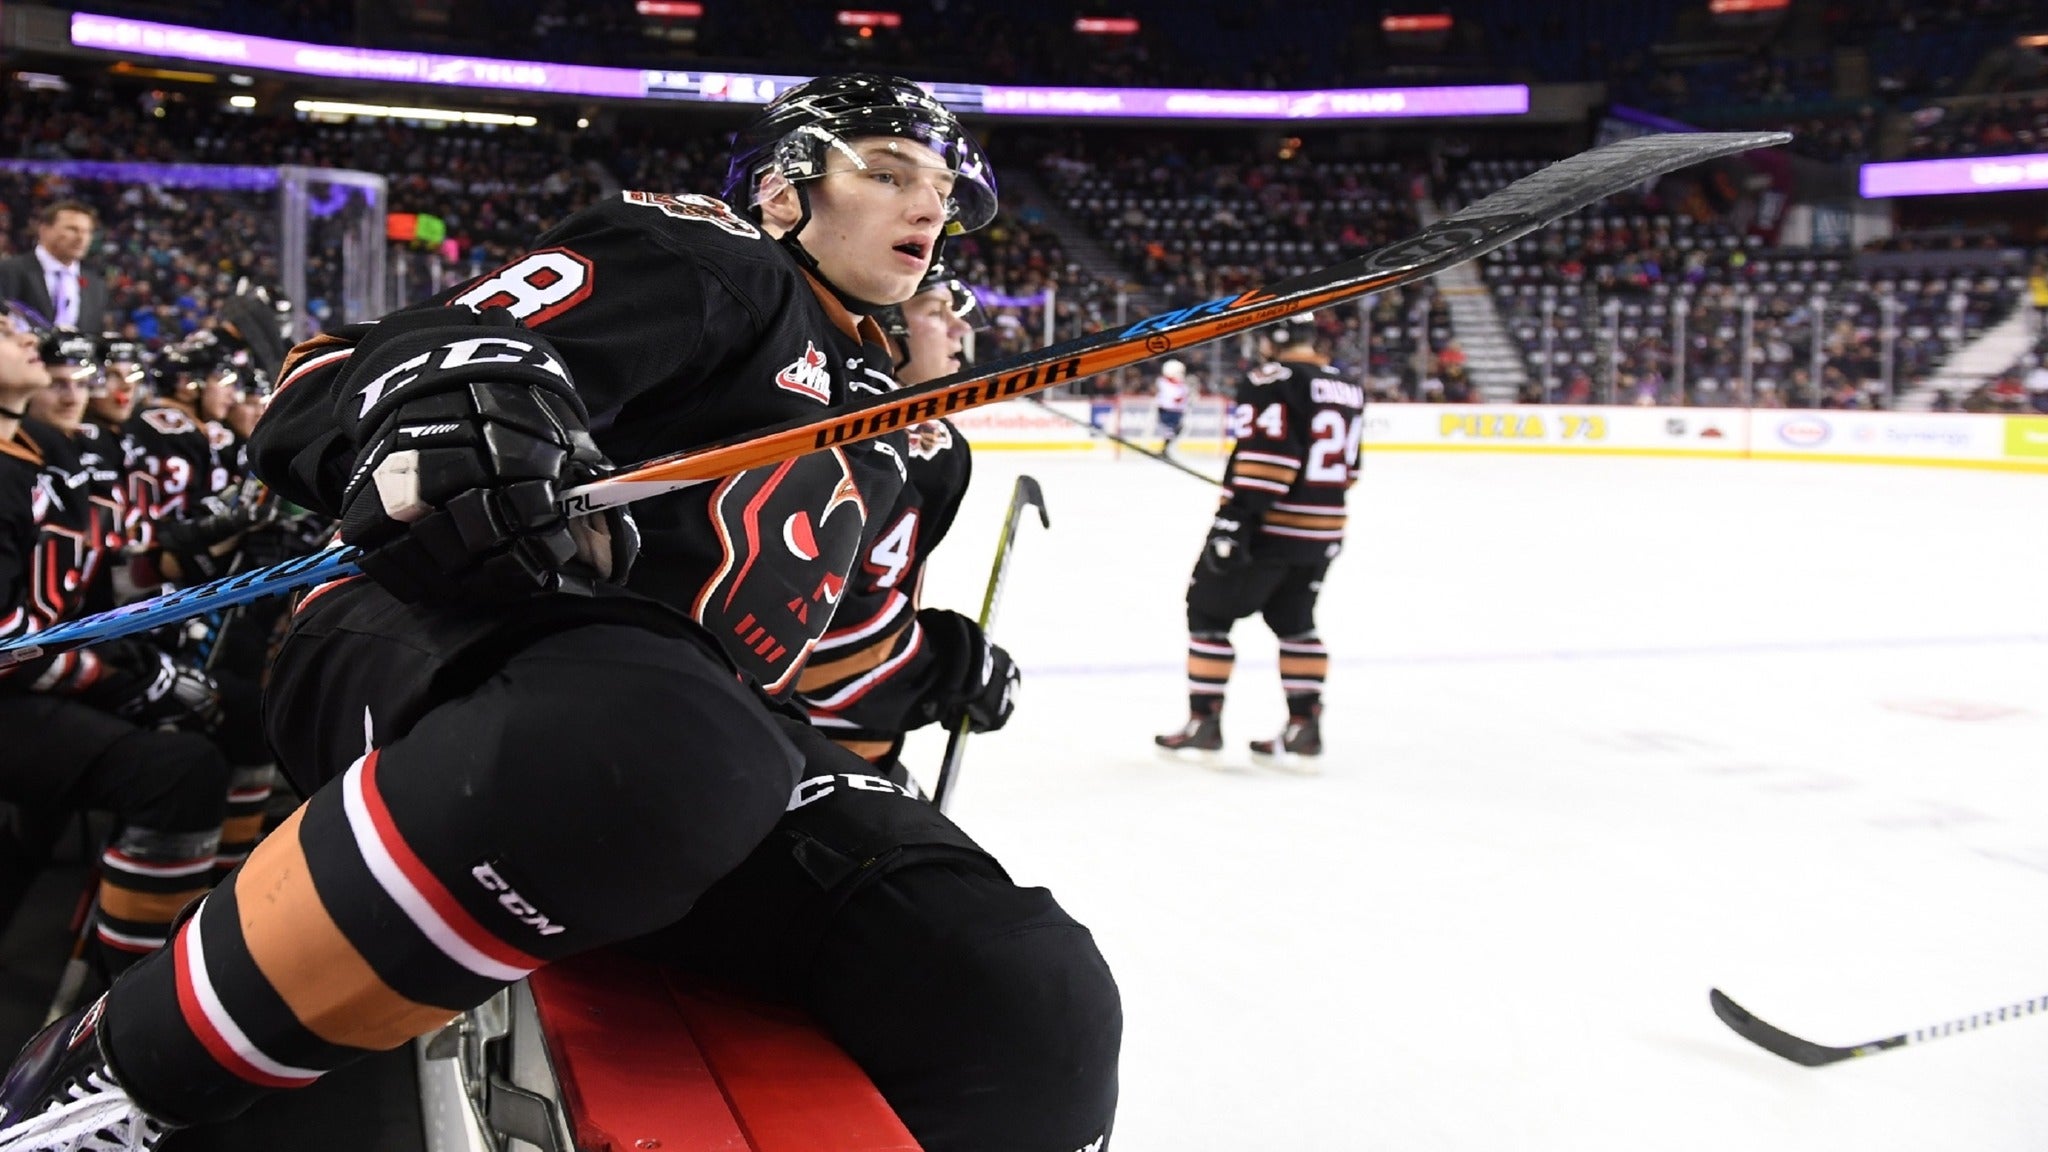 Calgary Hitmen vs. Swift Current Broncos in Calgary promo photo for Exclusive presale offer code